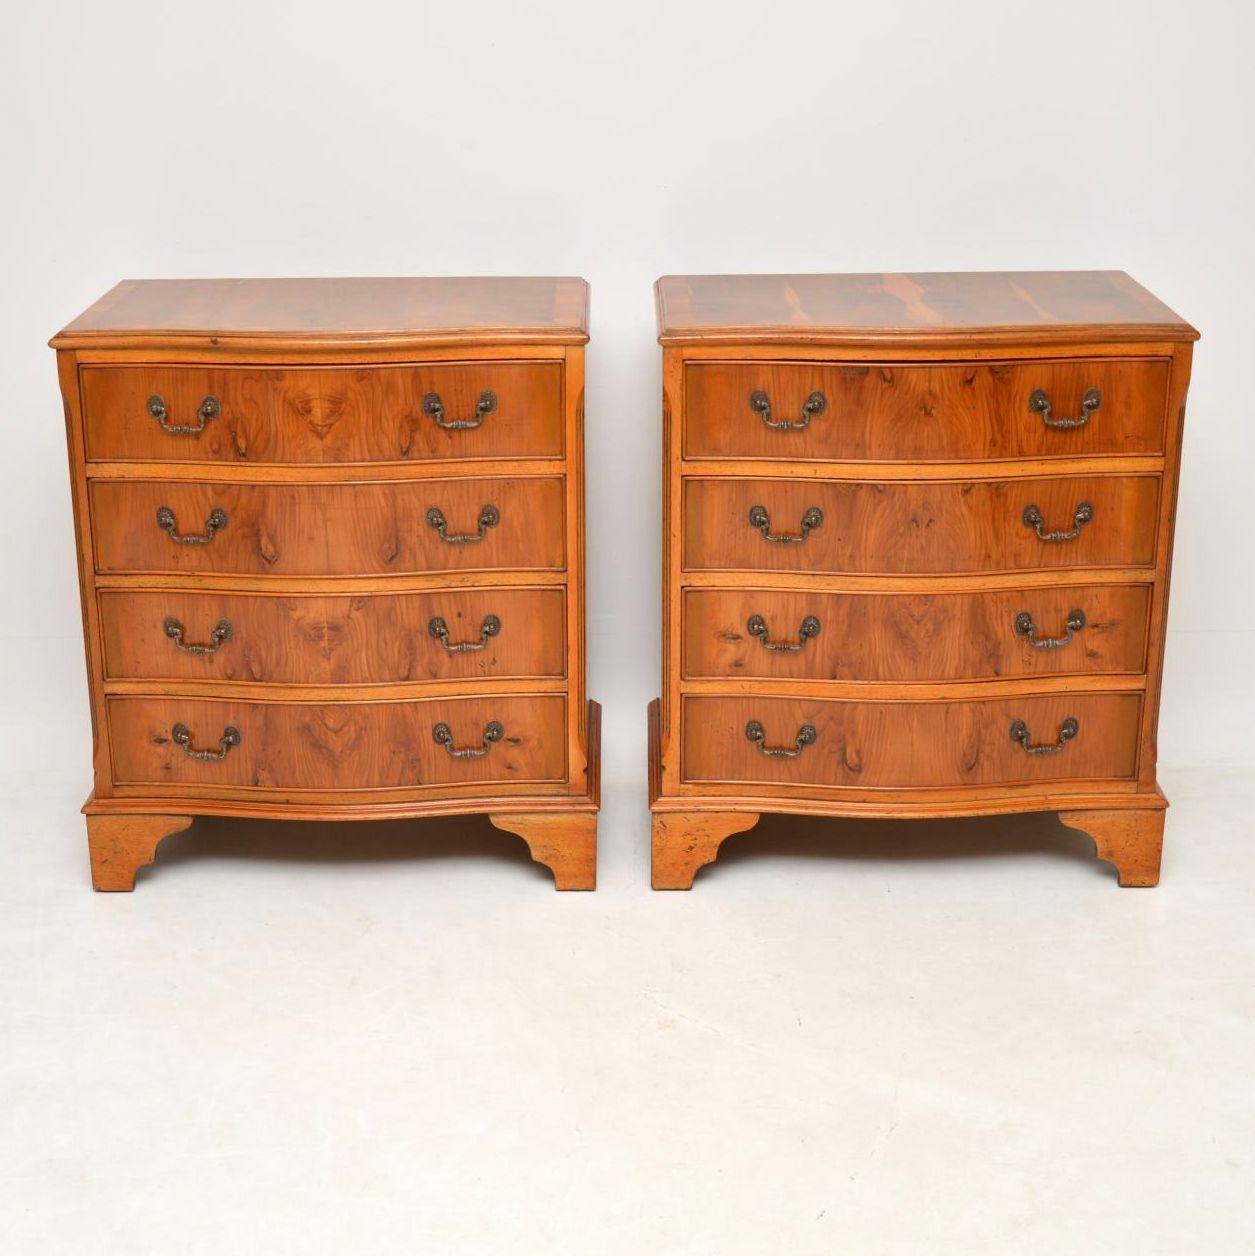 Pair of antique Georgian style serpentine fronted yew wood chests of drawers dating to around the 1950s period. They have just been French polished so are in good condition. The tops are cross banded, the drawers have original brass handles and it